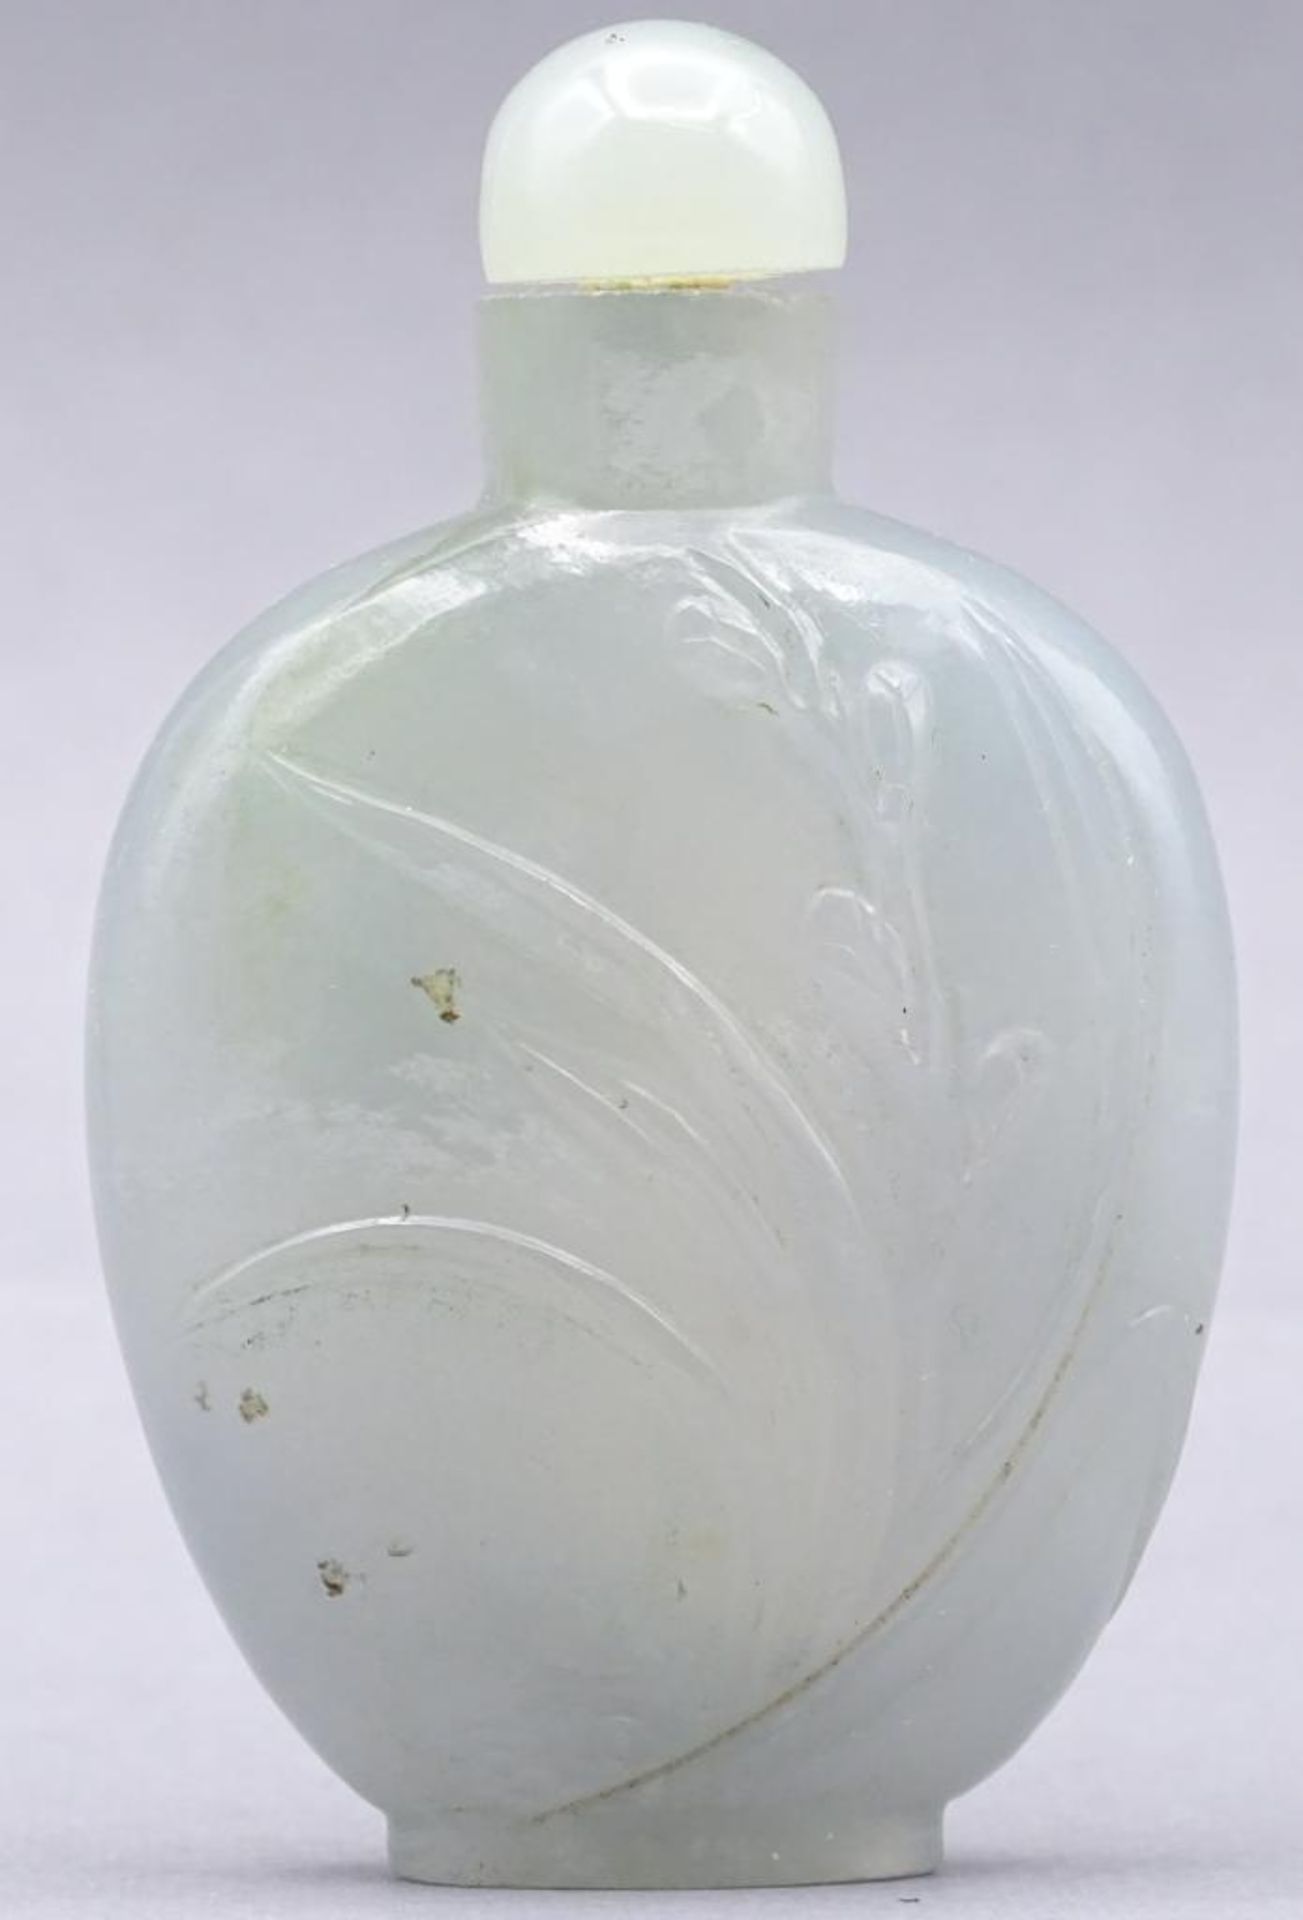 kl. Snuff Bottle,wohl Jade, China, h-6 cm, B-3,5 cm- - -22.61 % buyer's premium on the hammer - Image 5 of 8